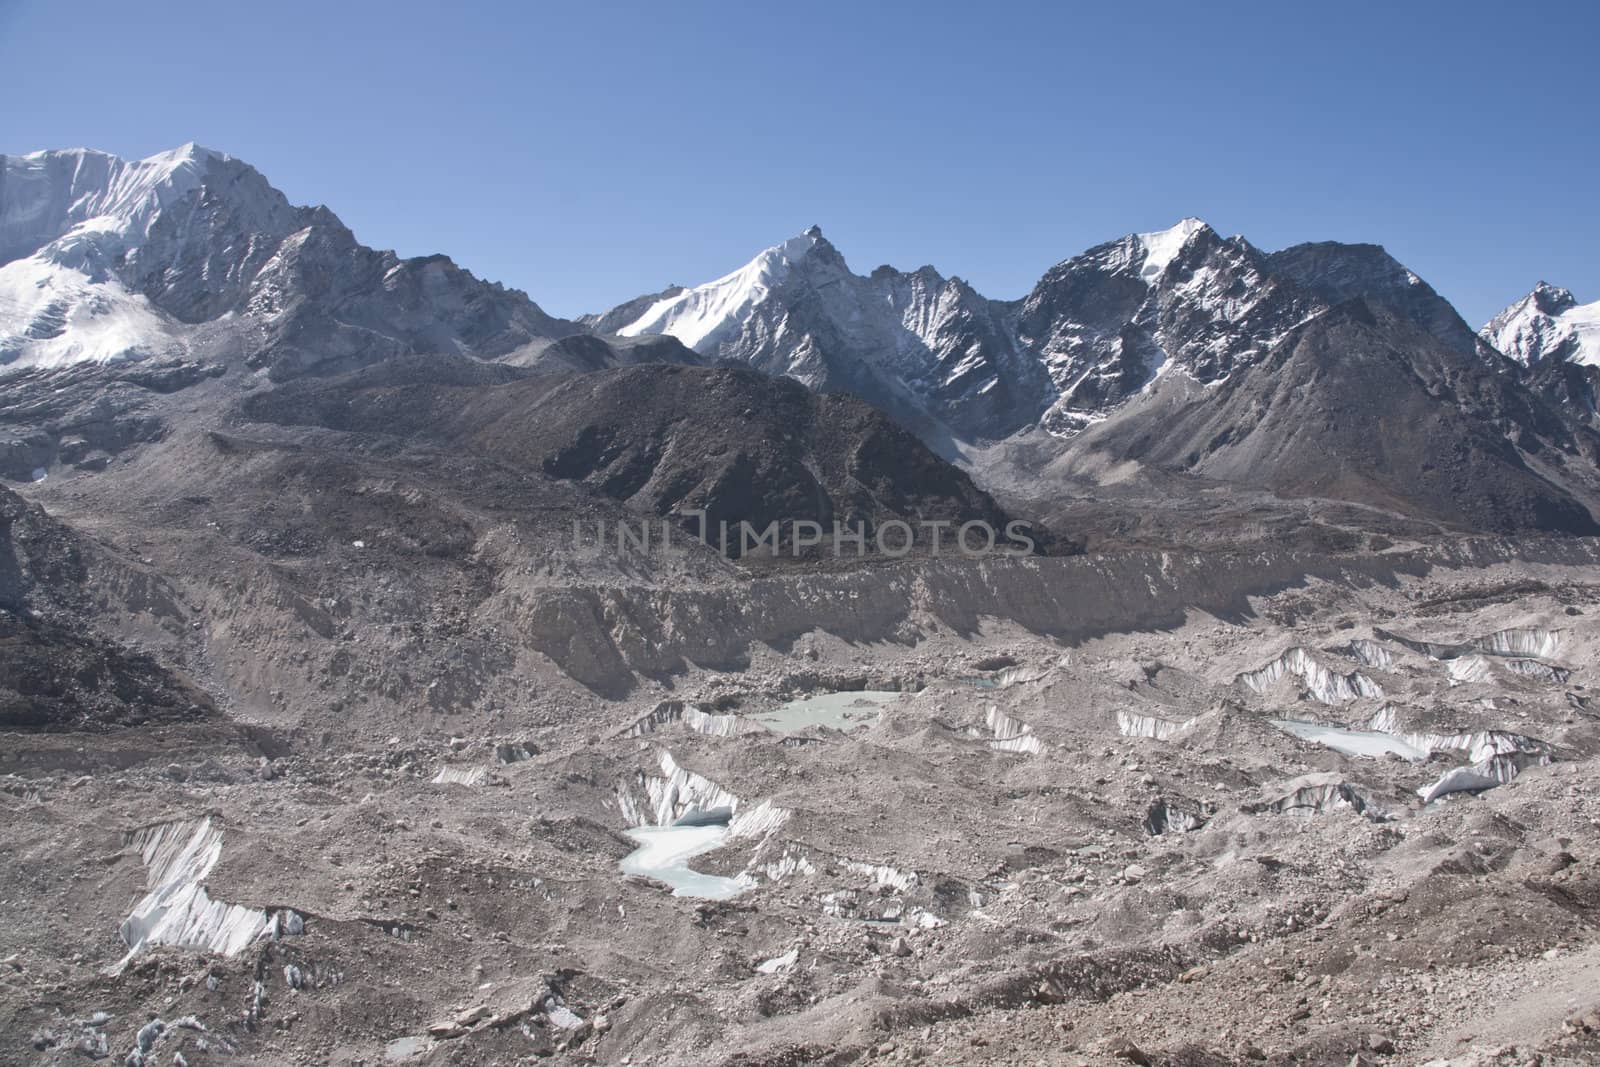 khumbu glacier. Powerful glacier covered in debris 5140m high in the Himalaya mountains of Nepal.